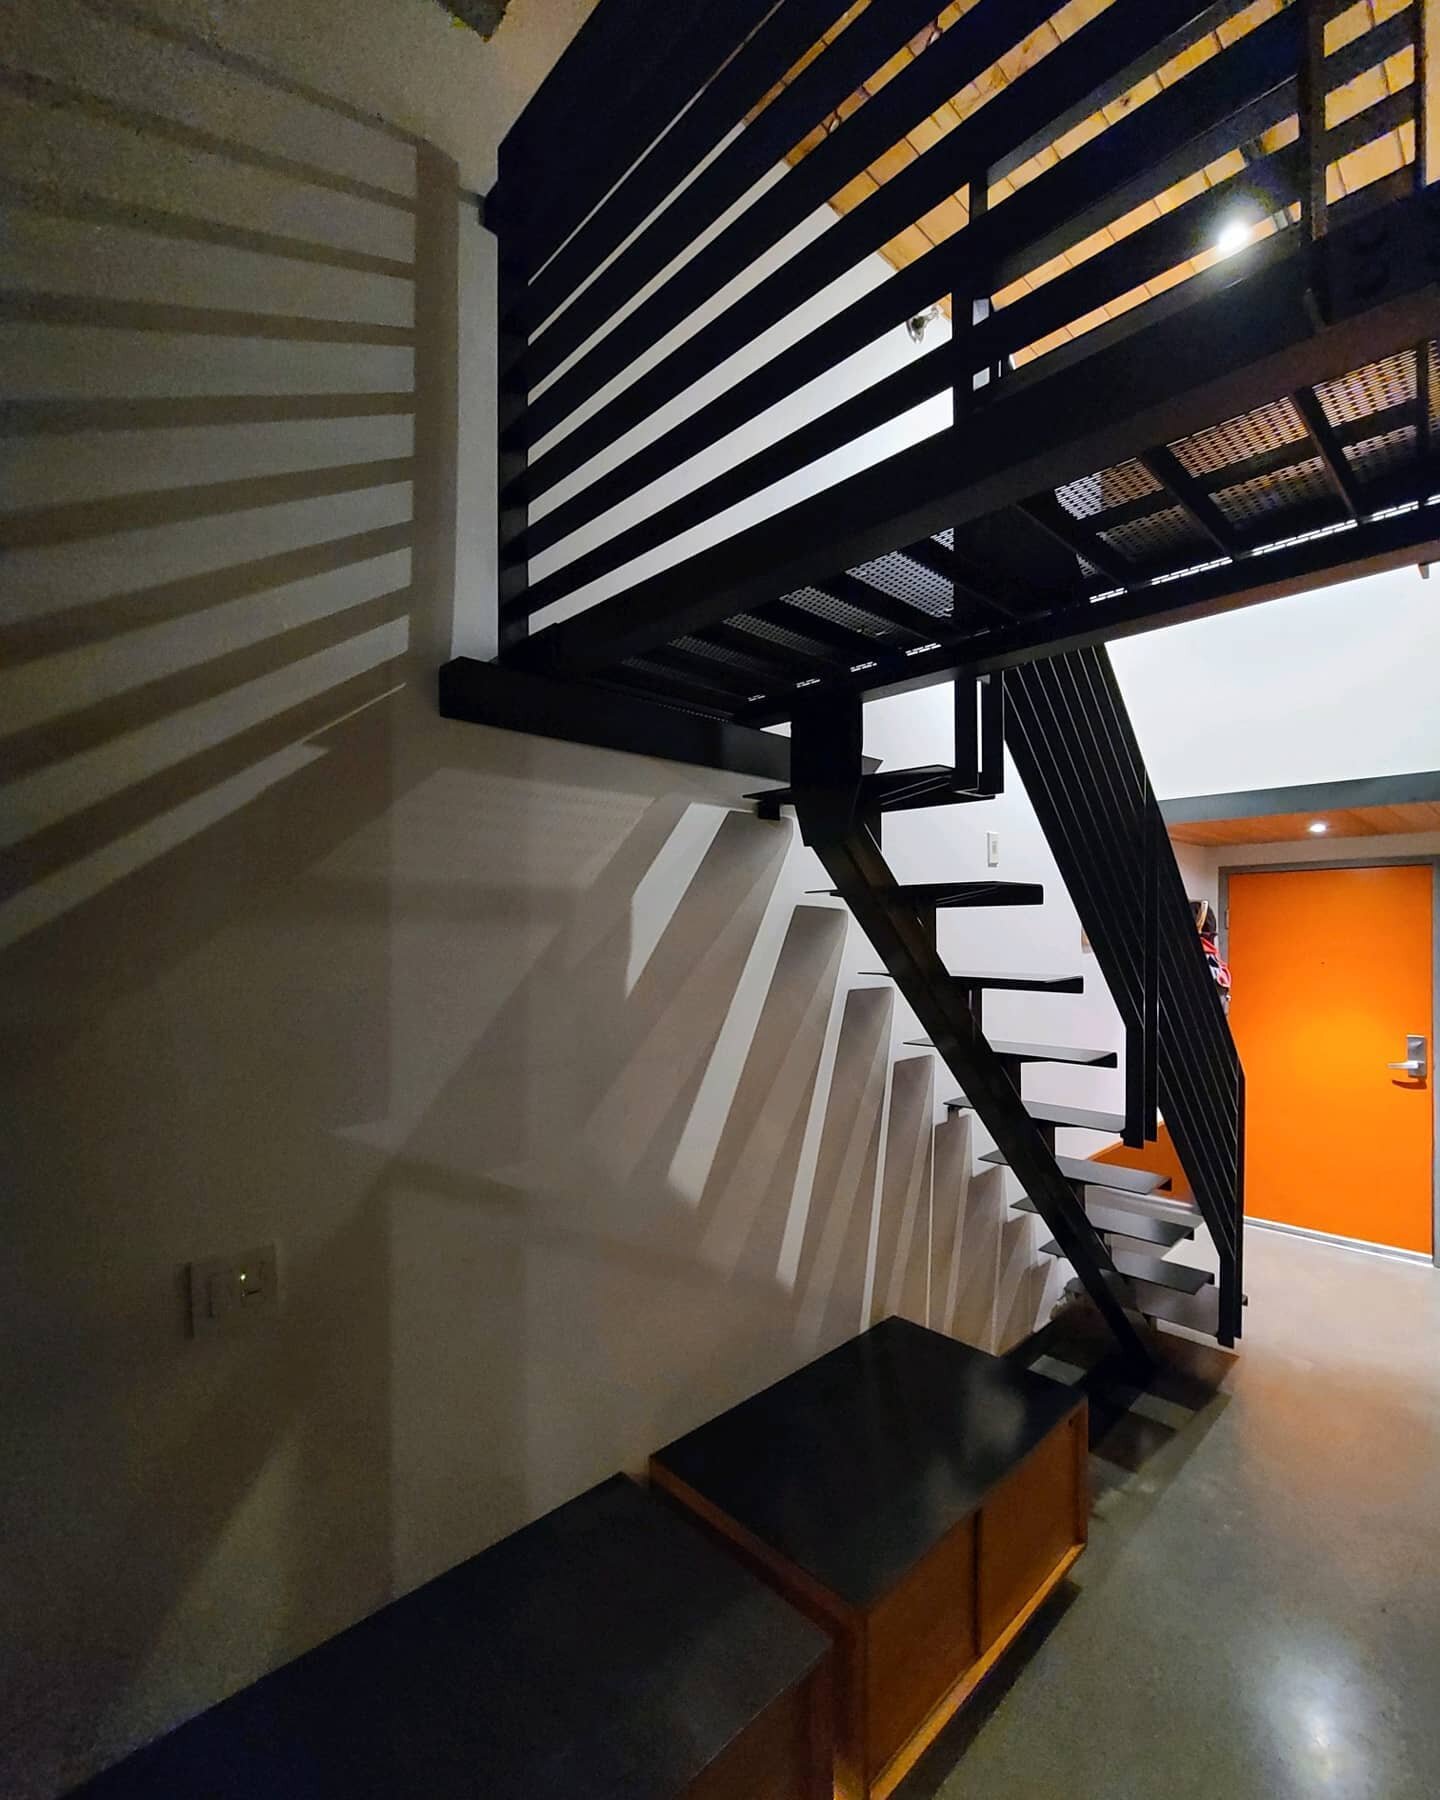 Steel mono stair system, installed. Details: floating mono stringer with hidden mechanical connections, profiled non-slip steel treads with open risers (grip to come), adjoining catwalk with perforated floor, side-mounted rails wrapped up and around.